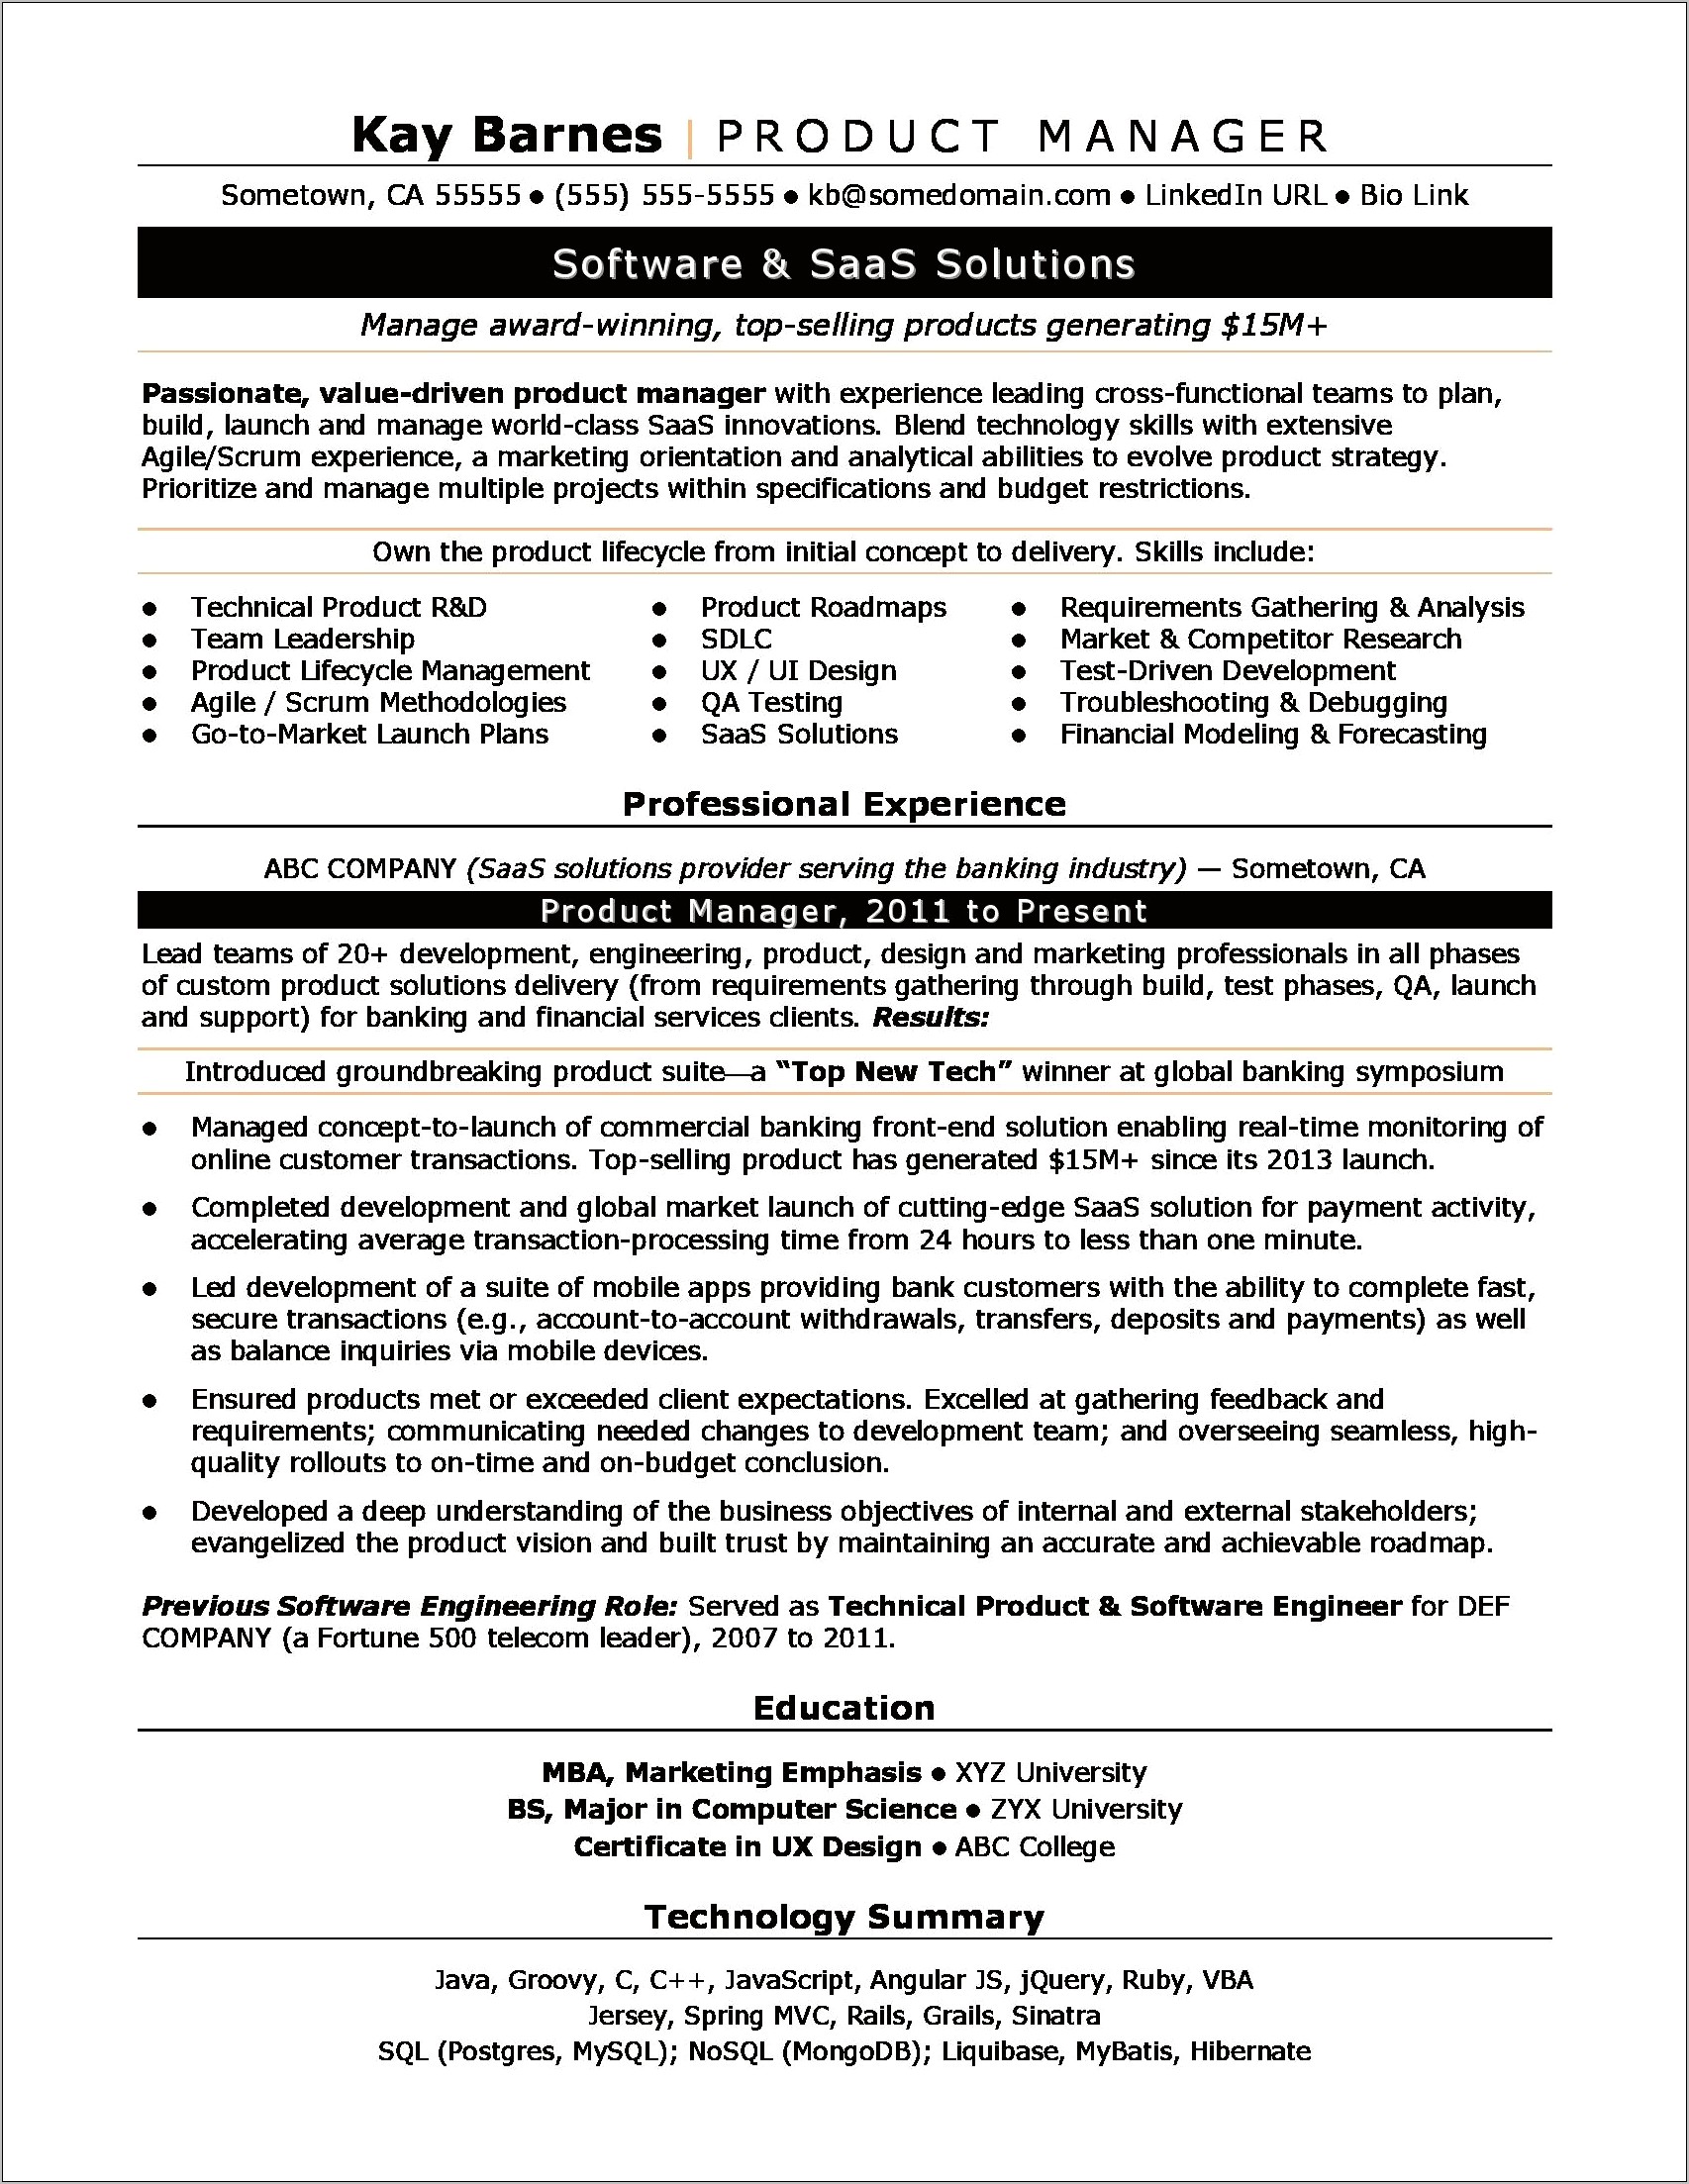 Best Resume Format For Experienced Marketing Professionals